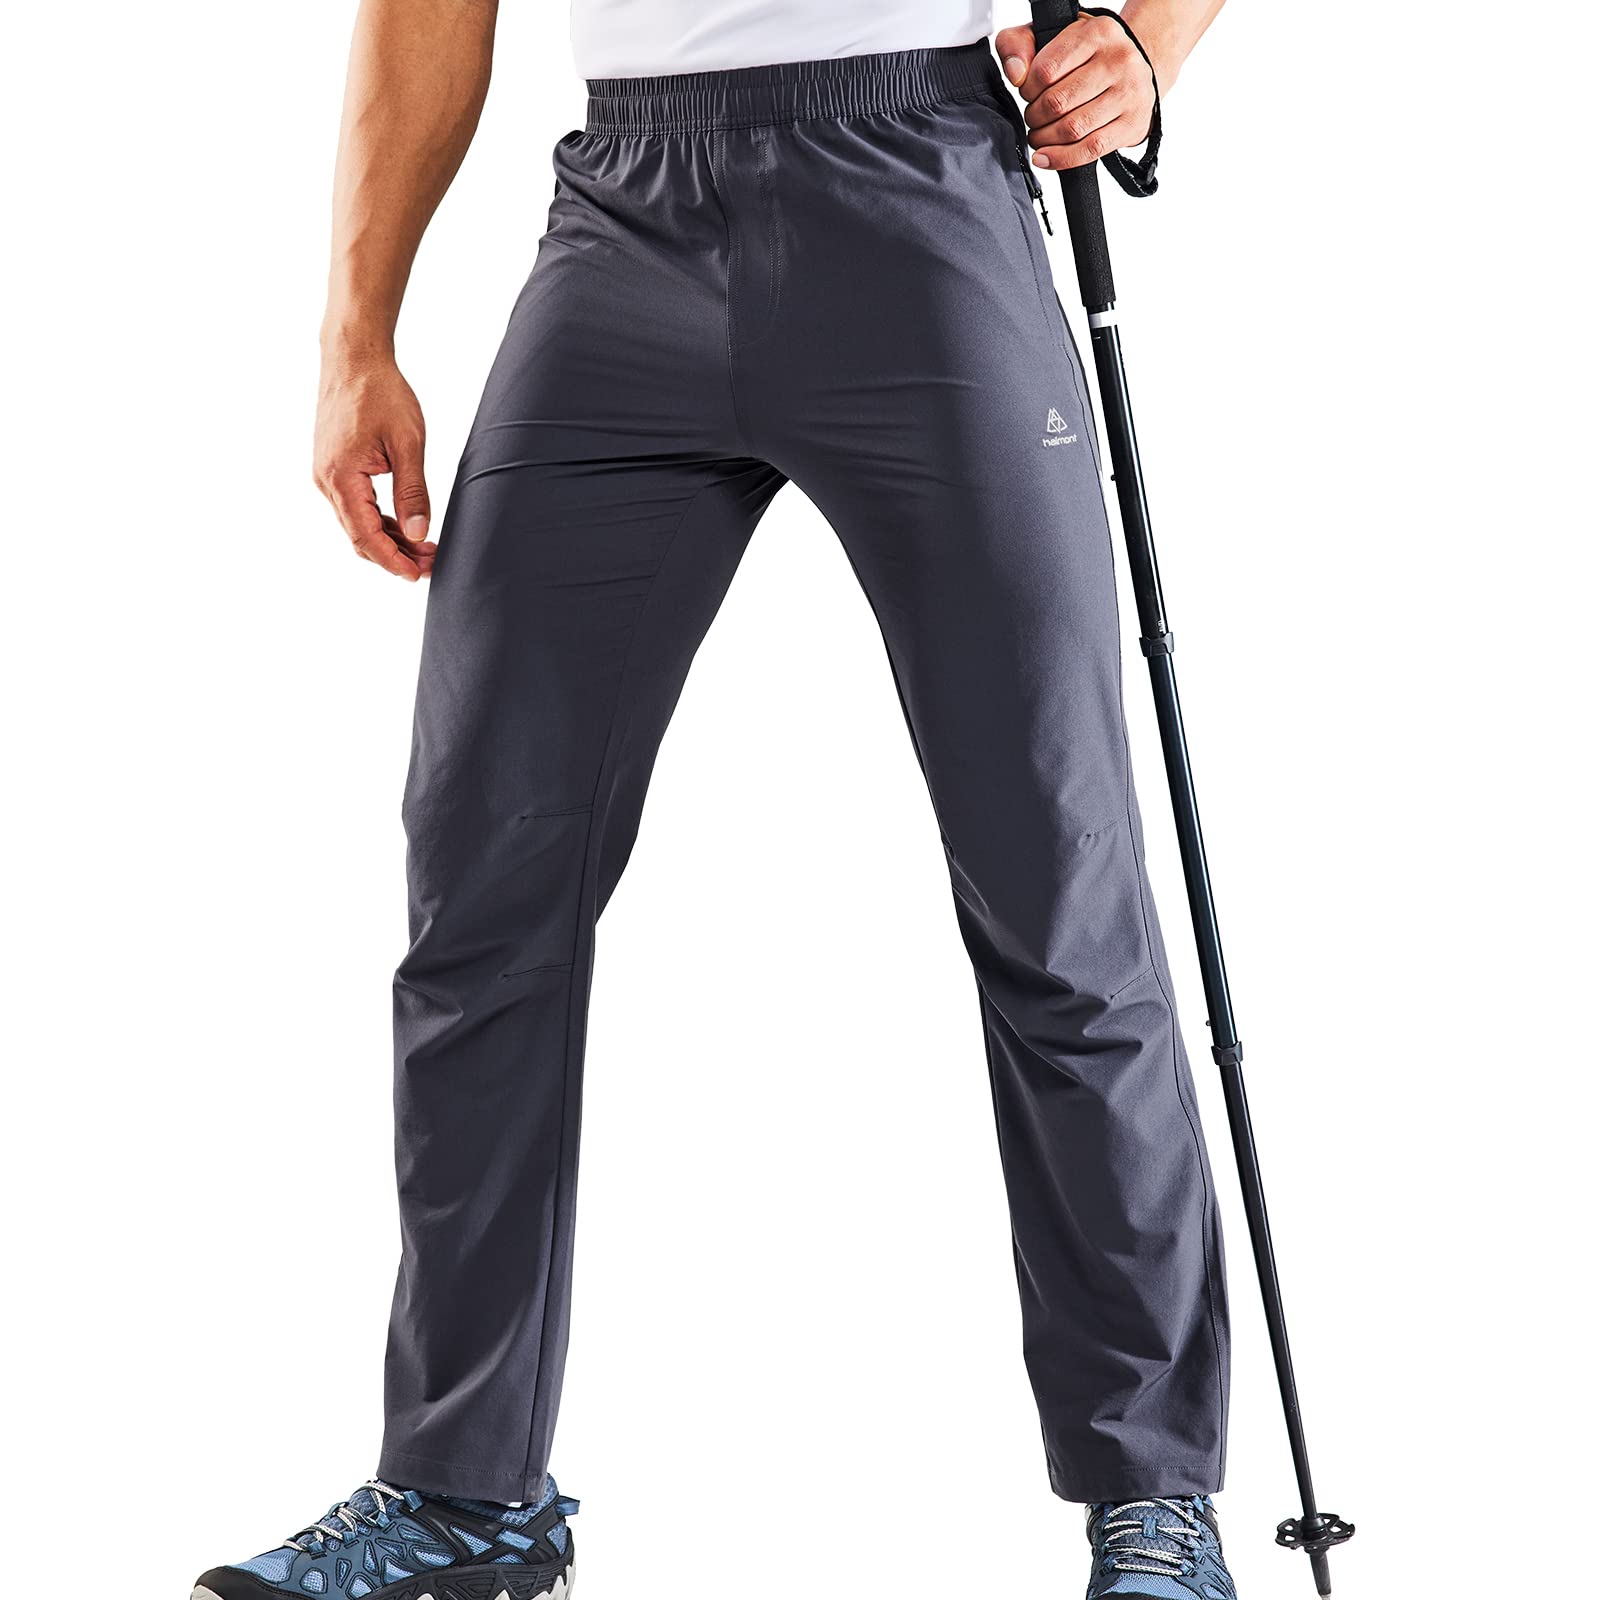 Mens Hiking Stretch Pants Lightweight Water Resistant Outdoor Fishing Pants  - S S